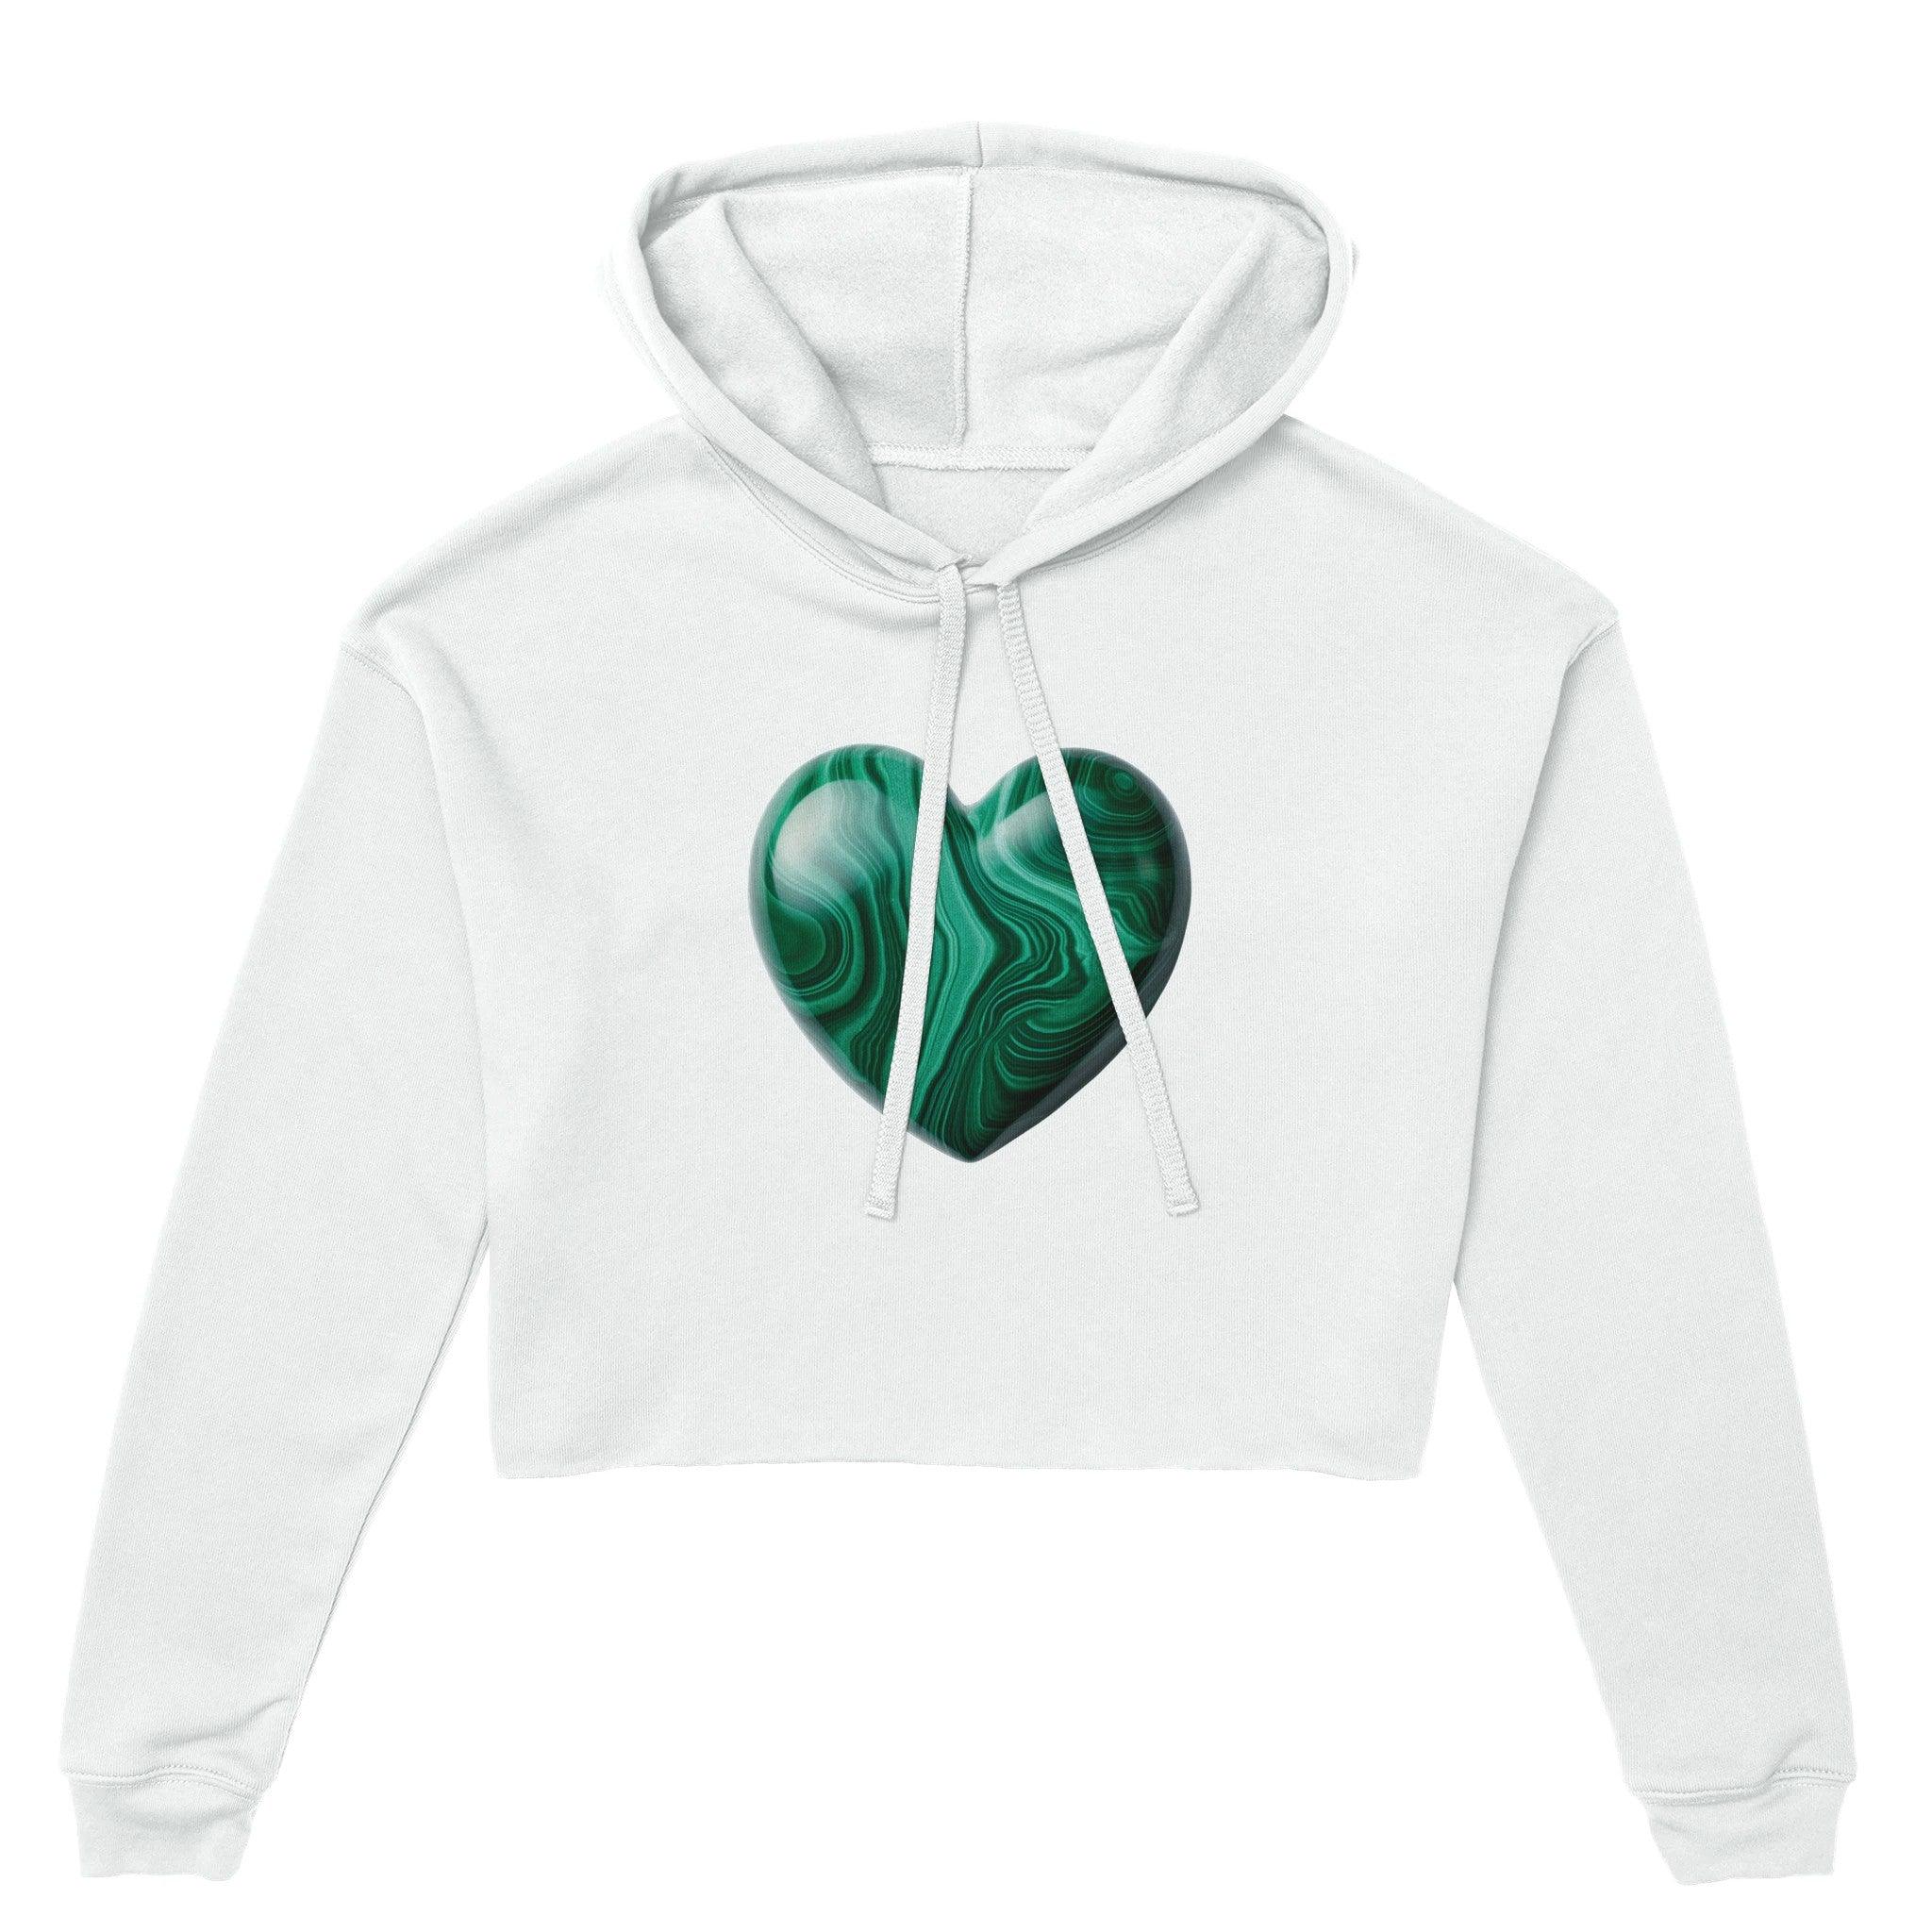 'Heart of stone' Cropped Hoodie - POMA